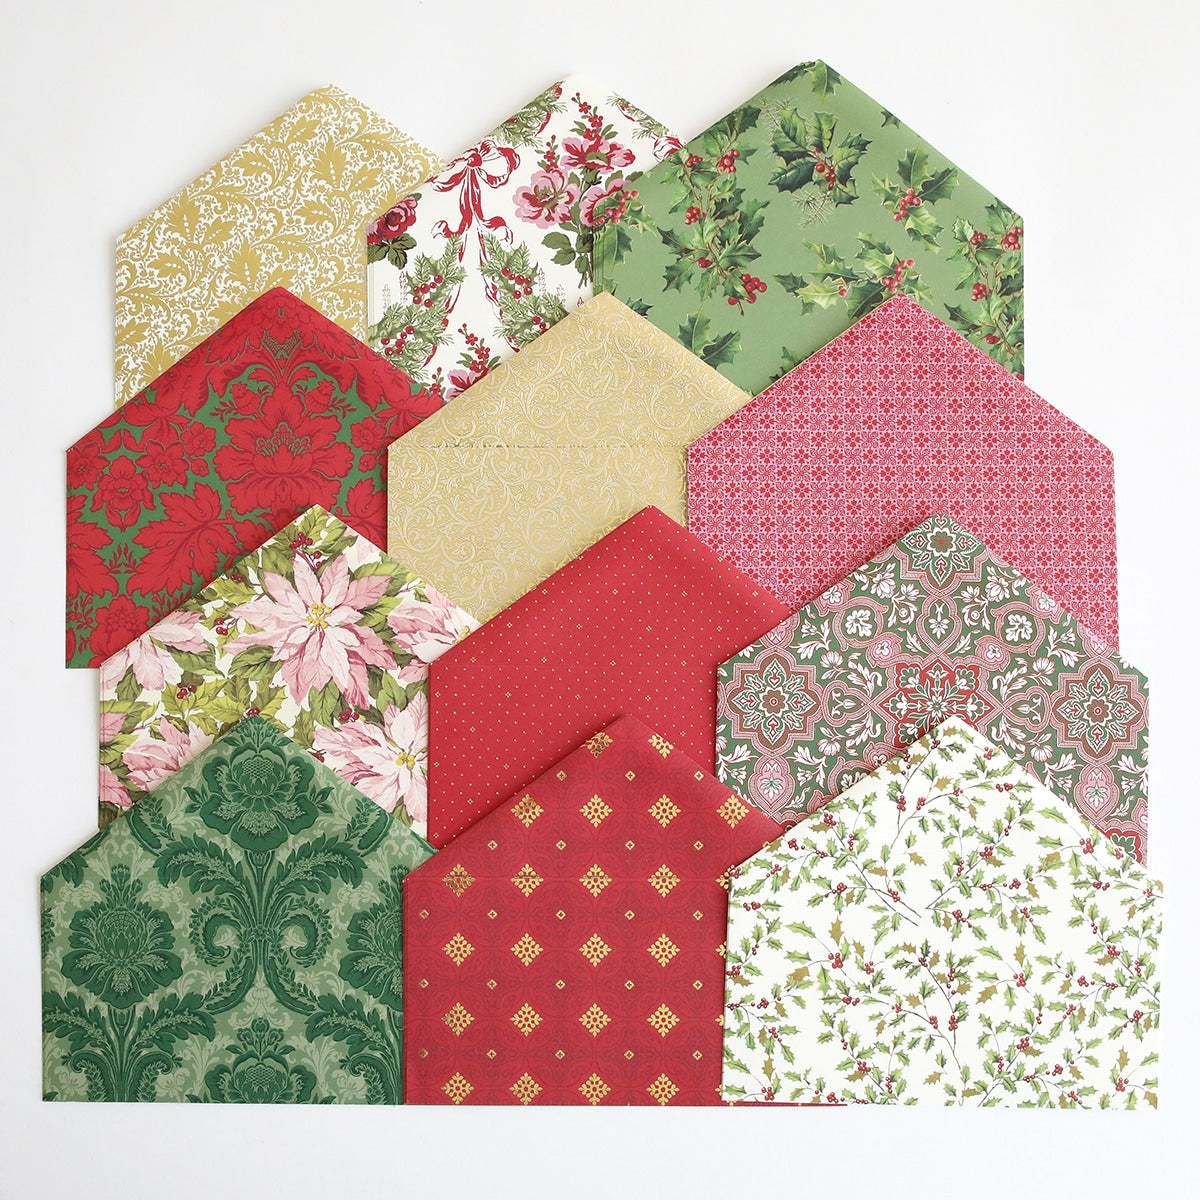 A group of Holiday Envelope Liners with red and green designs.